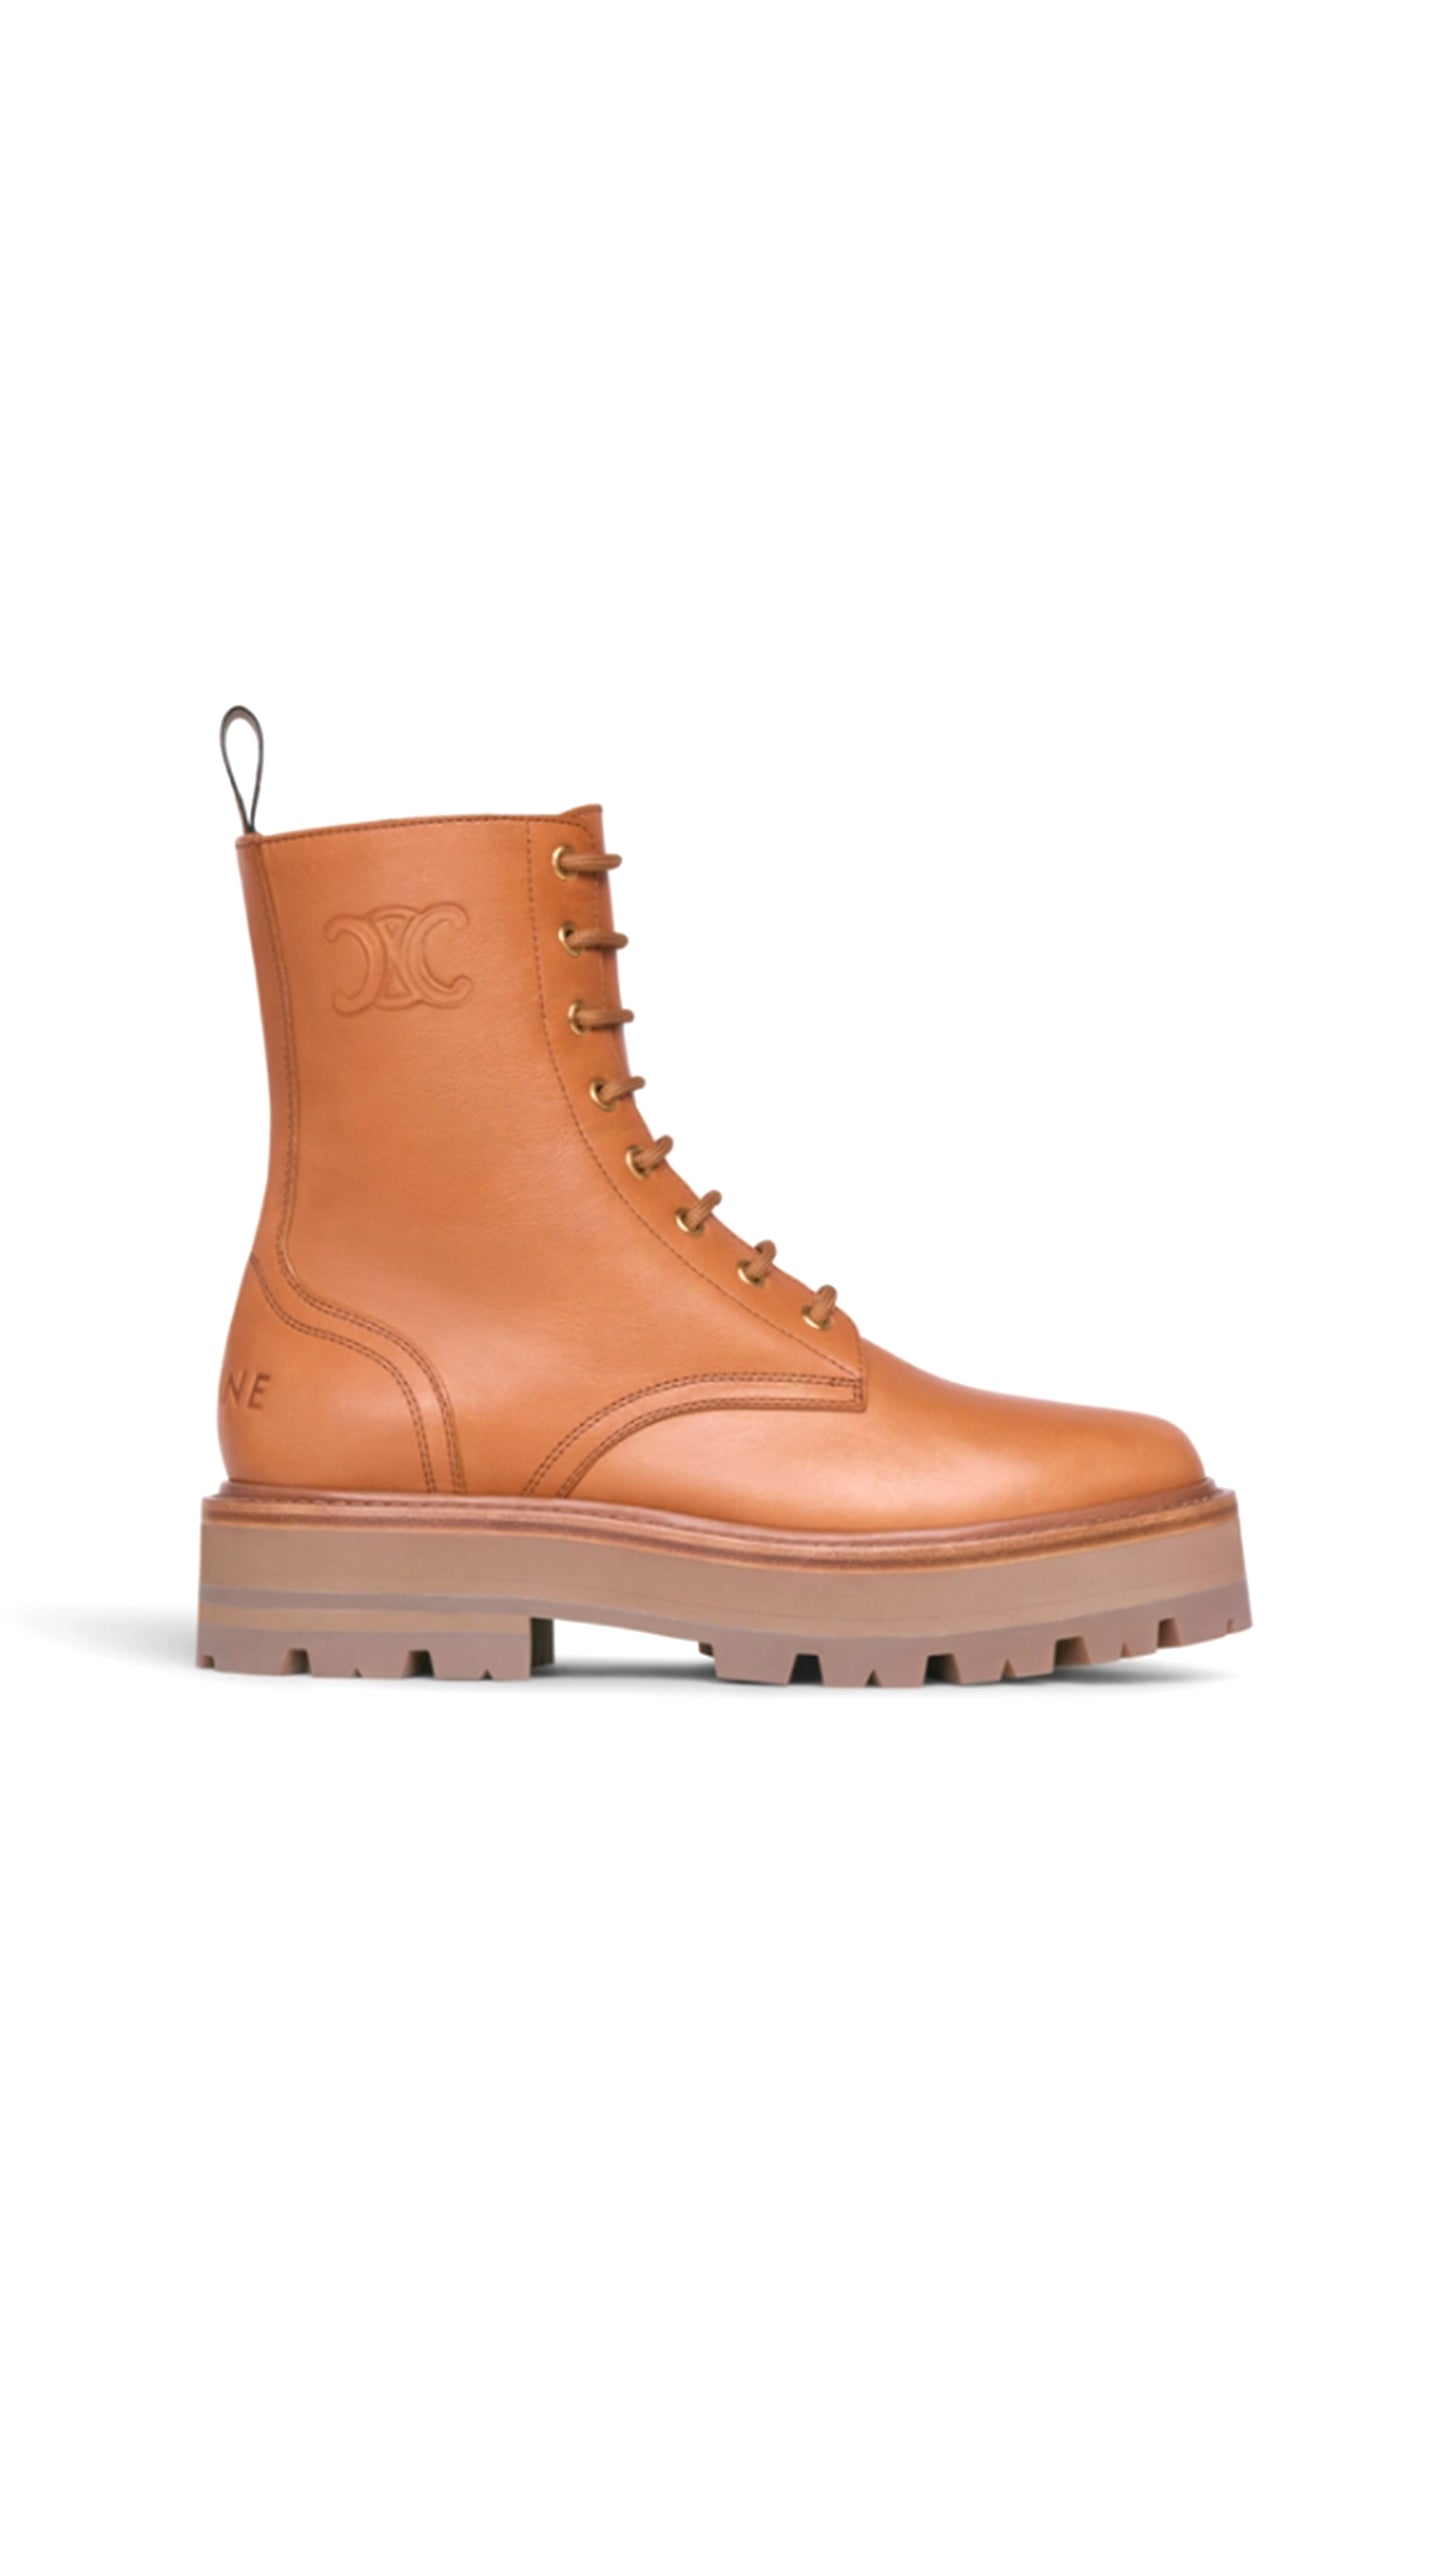 Bulky Laced Up Boot In Calfskin - Tan